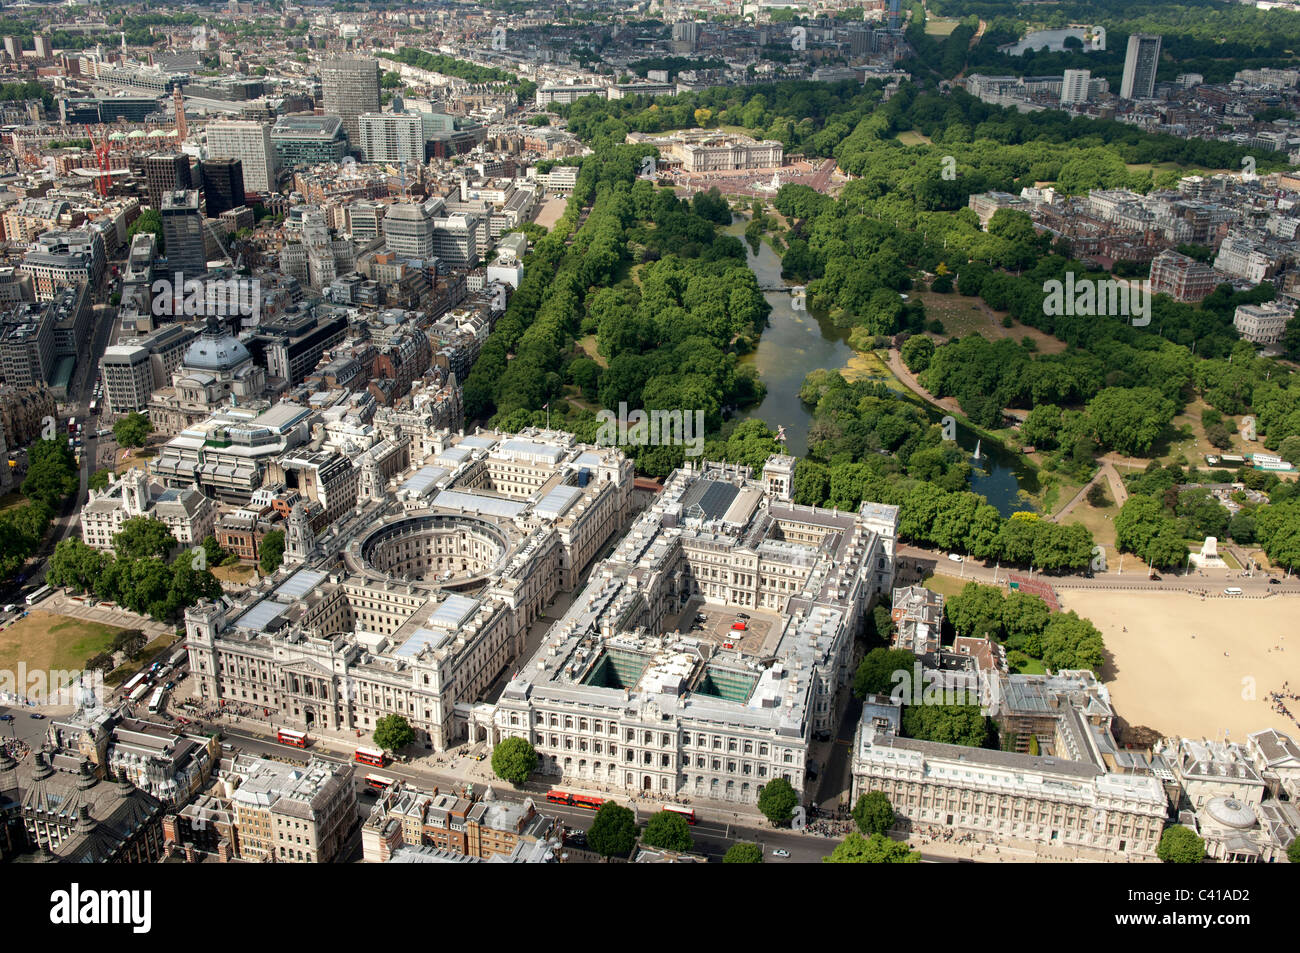 Whitehall, Downing Street and St James's Park as seen from the air. Stock Photo